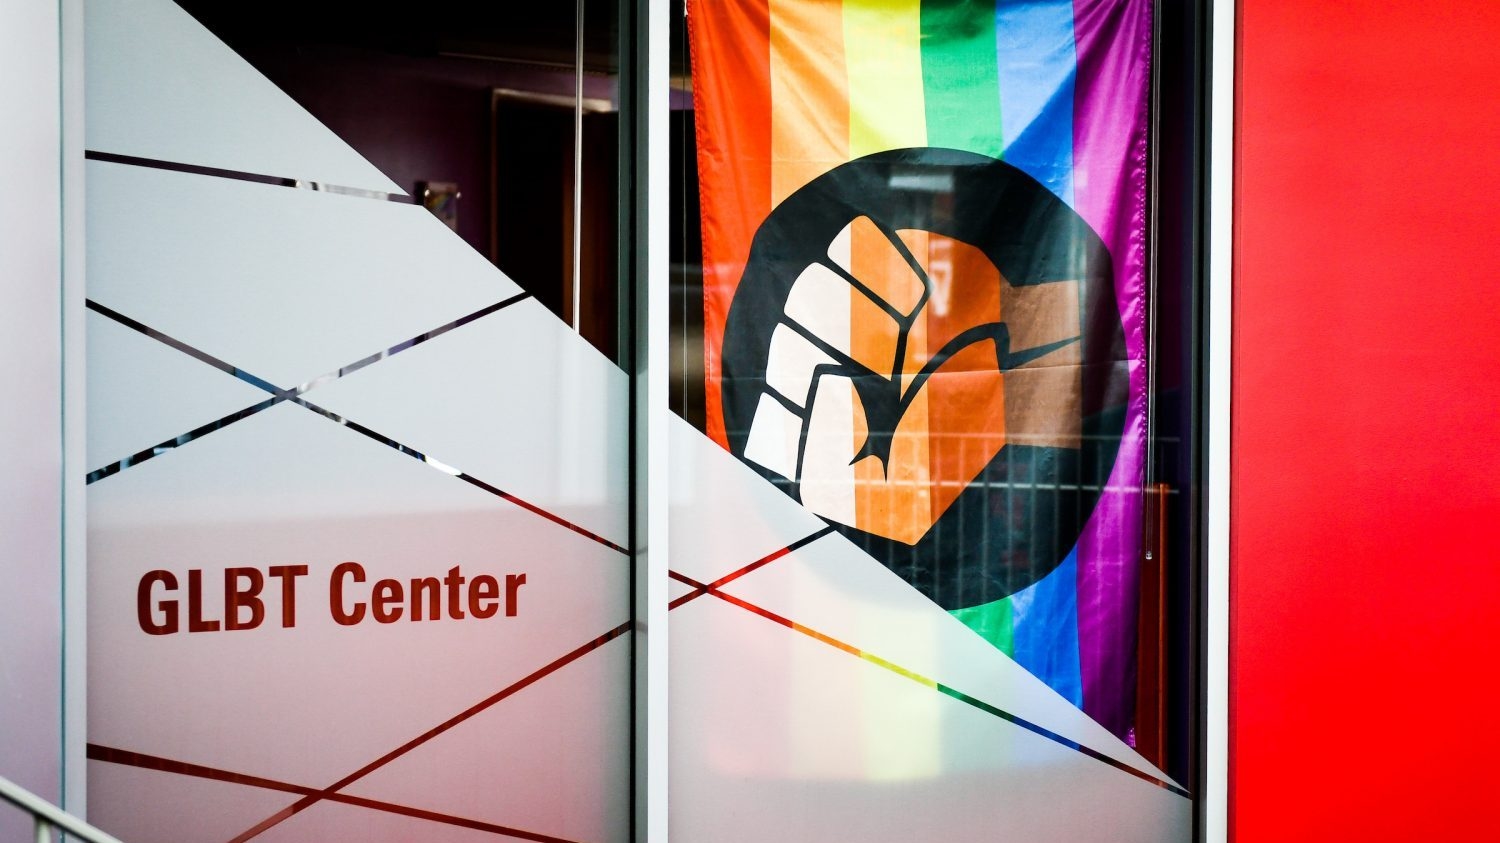 exterior shot of the GLBT center doors with the pride flag with raised fist hanging